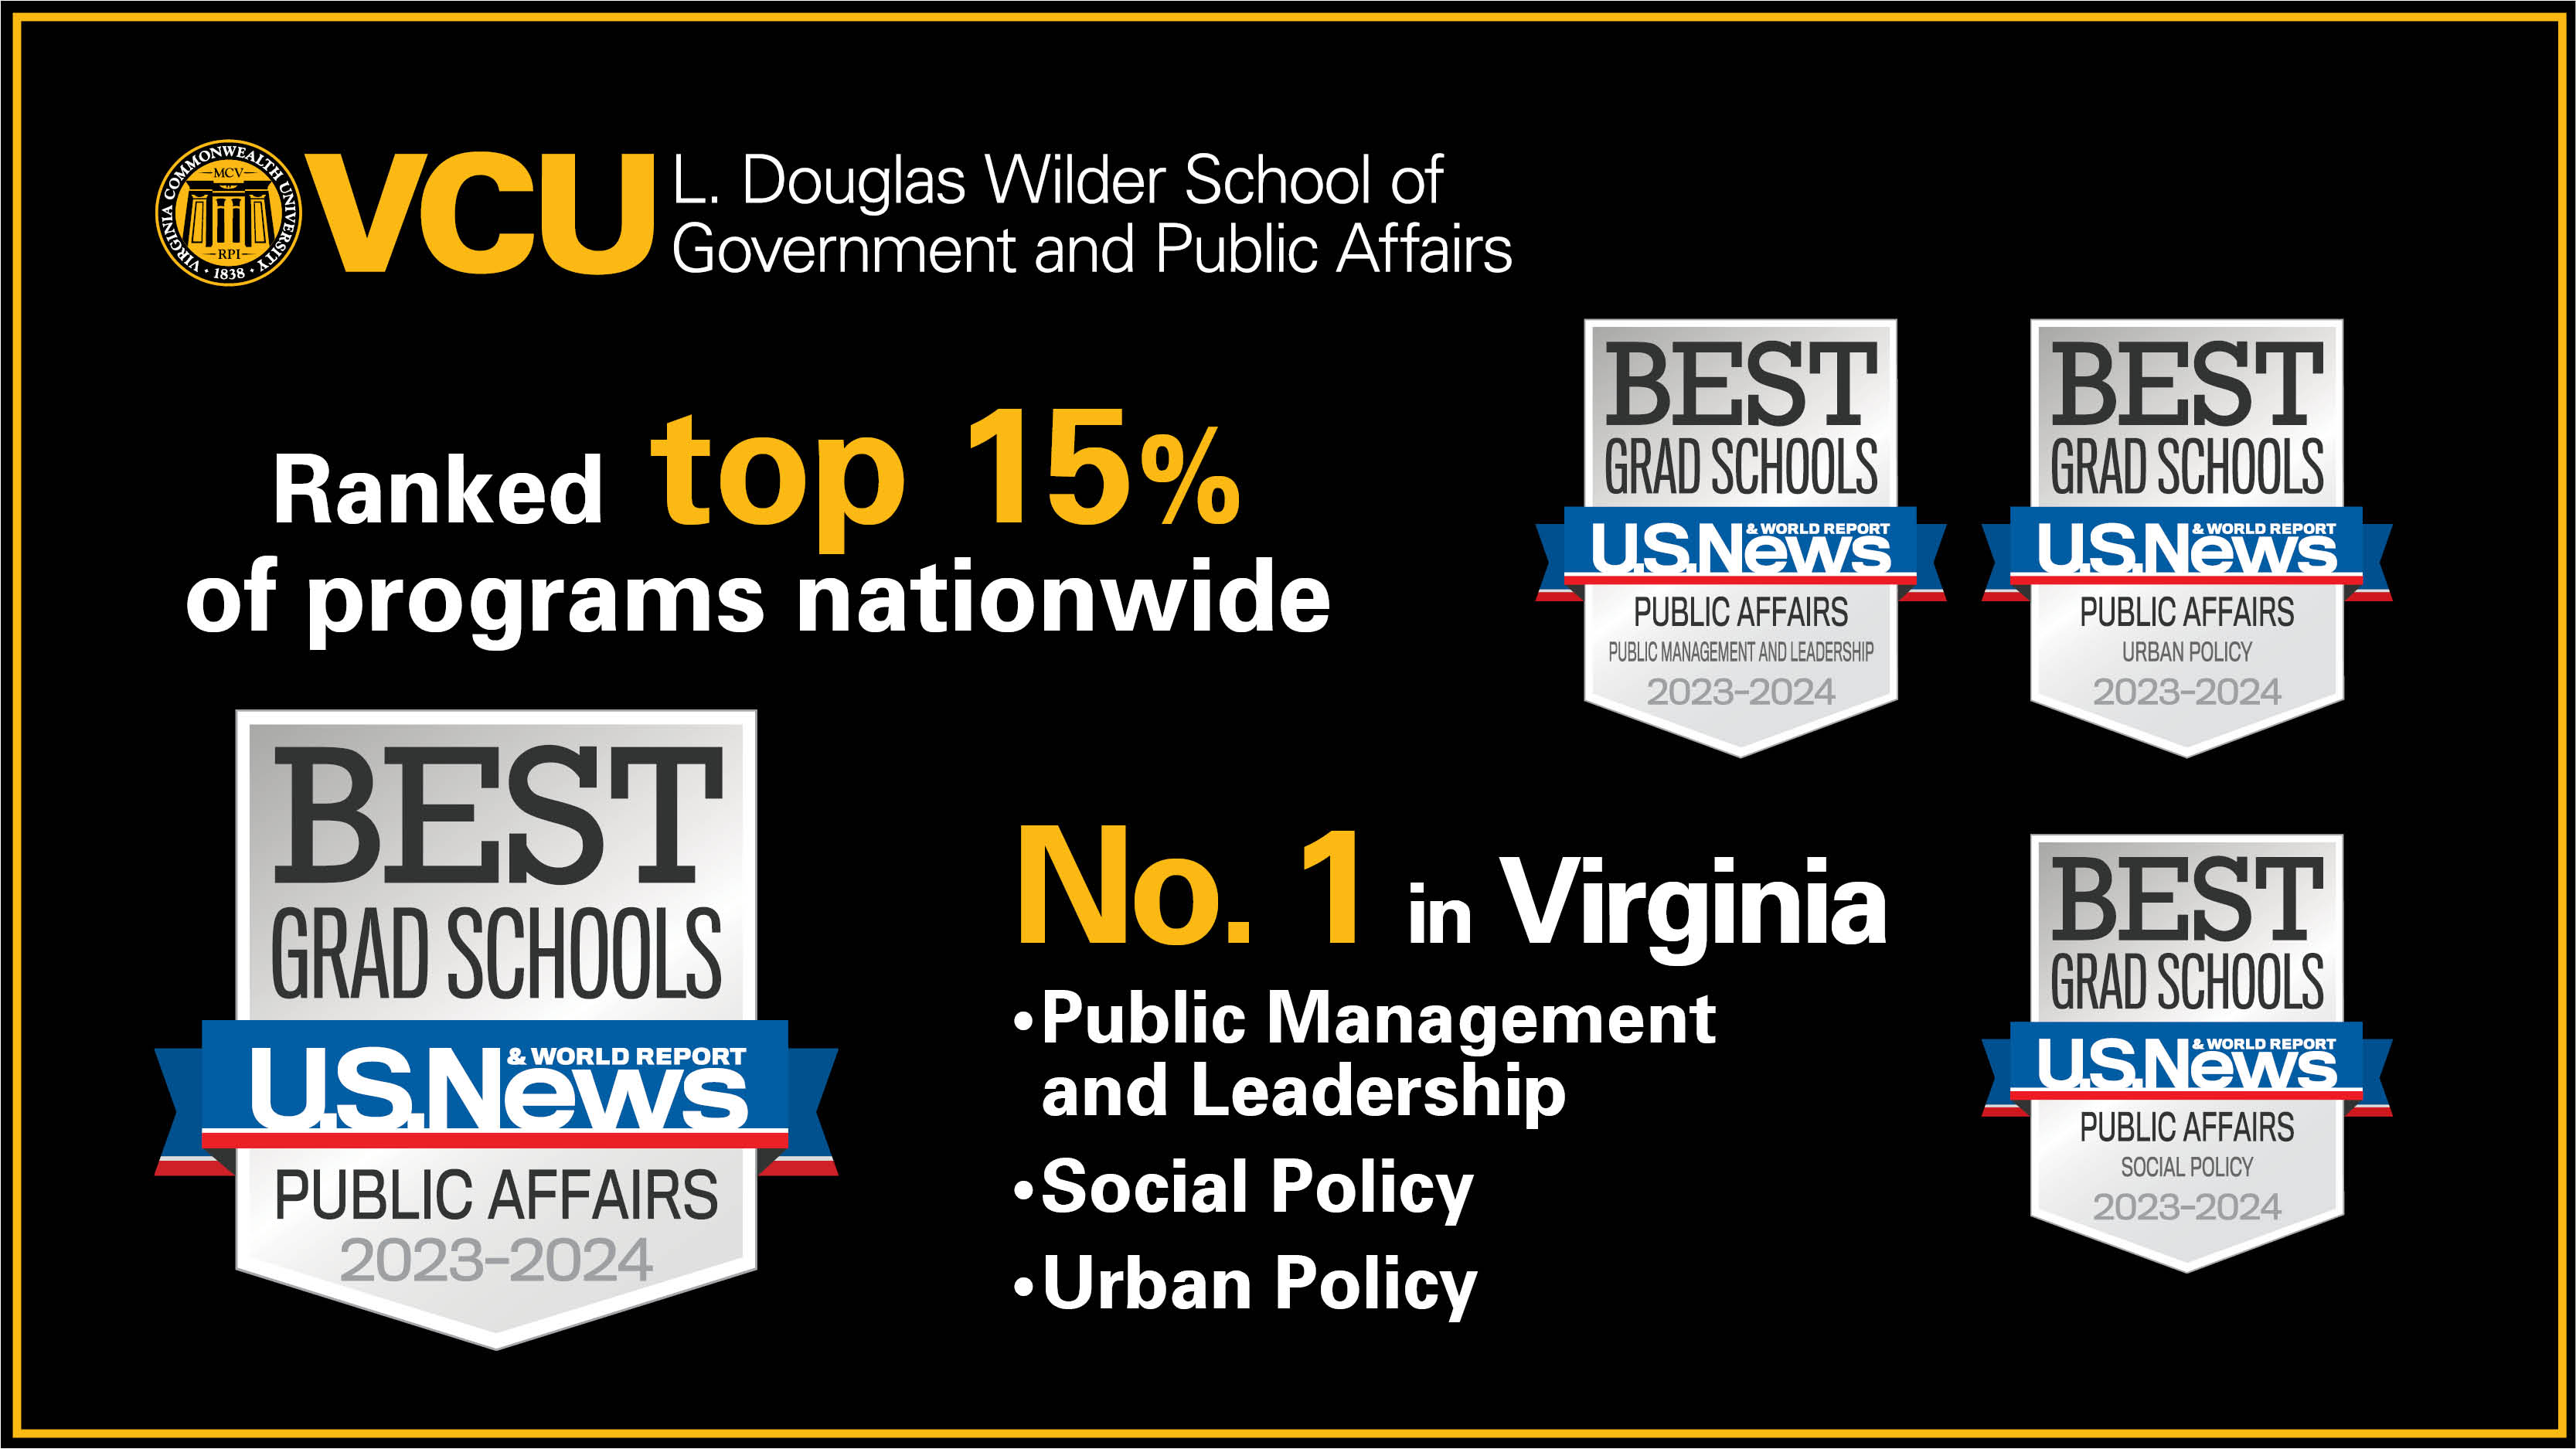 U.S. News & World Report ranks the Wilder School public affairs program at No. 39, which places us in the top 15% of more than 250 schools across the United States, as well as top-50 rankings in four program specialty areas.